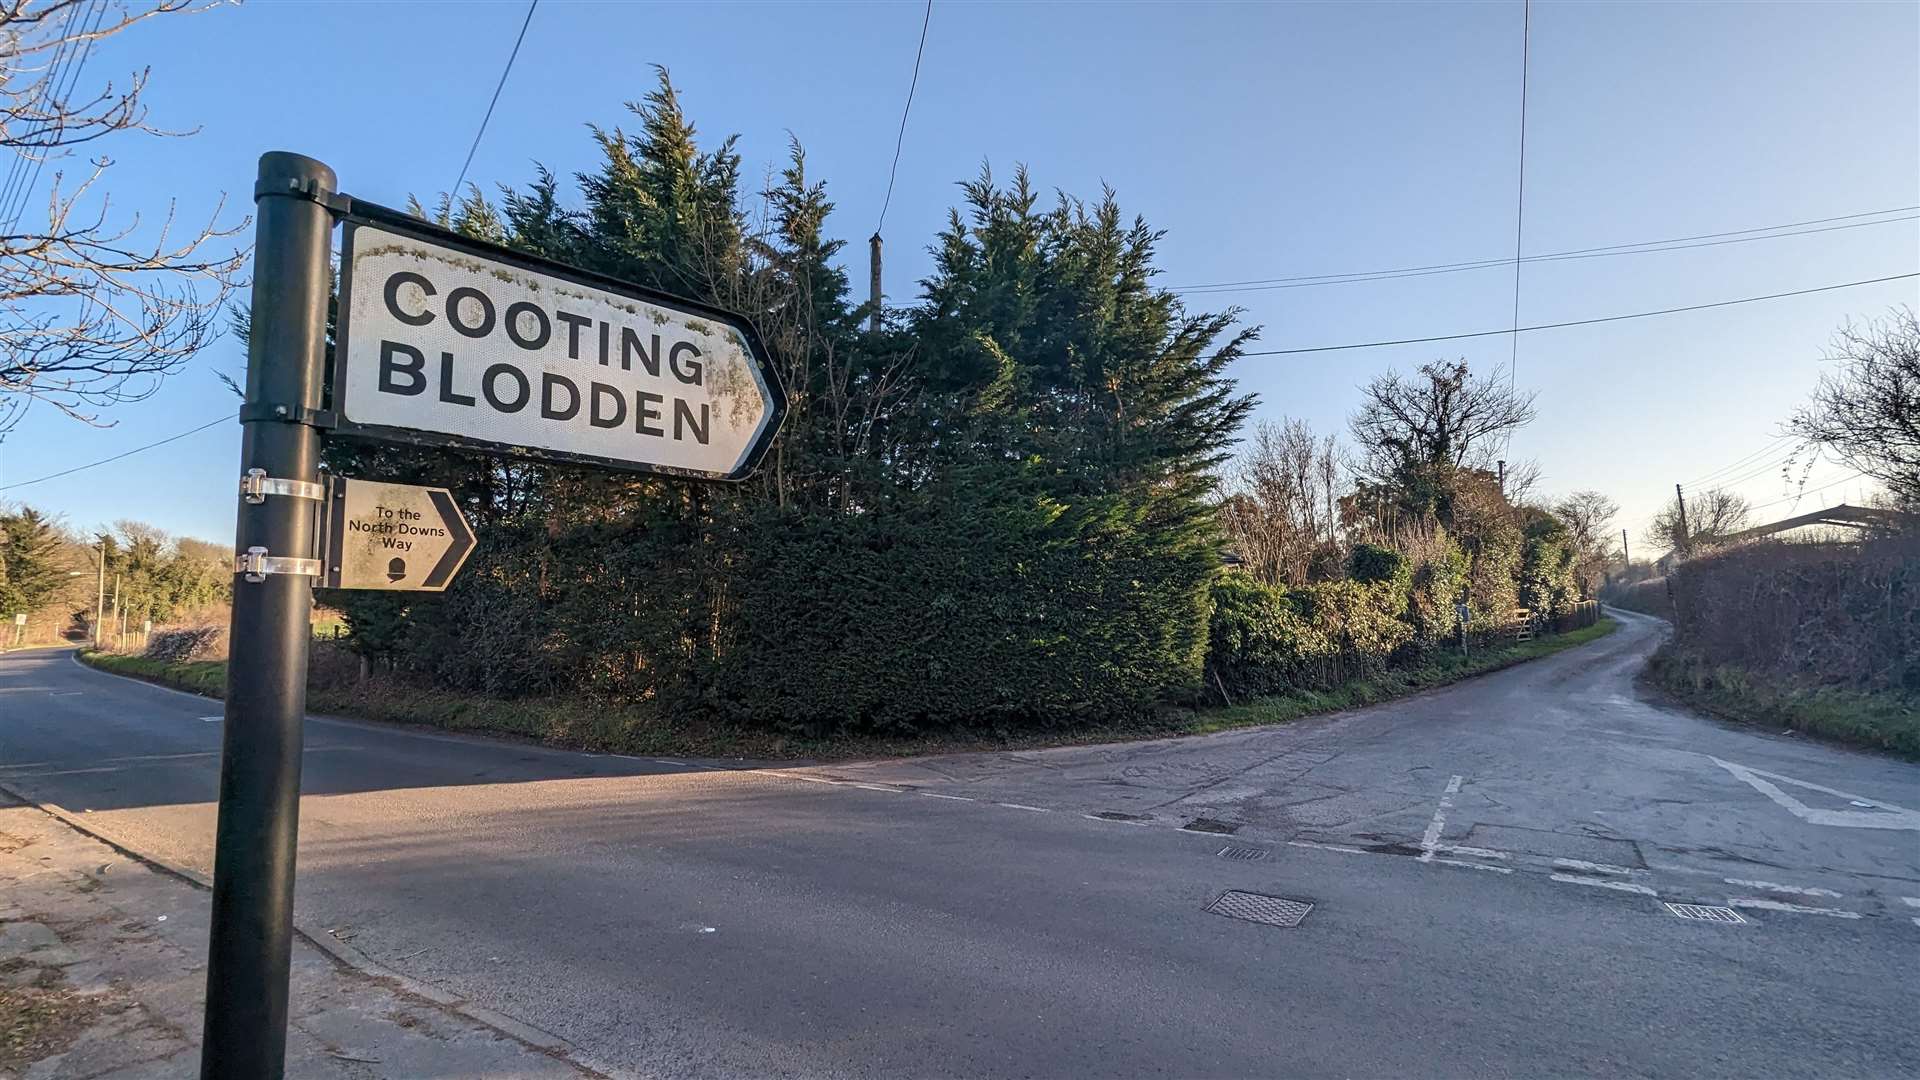 The hamlet of Cooting could be turned into a small town